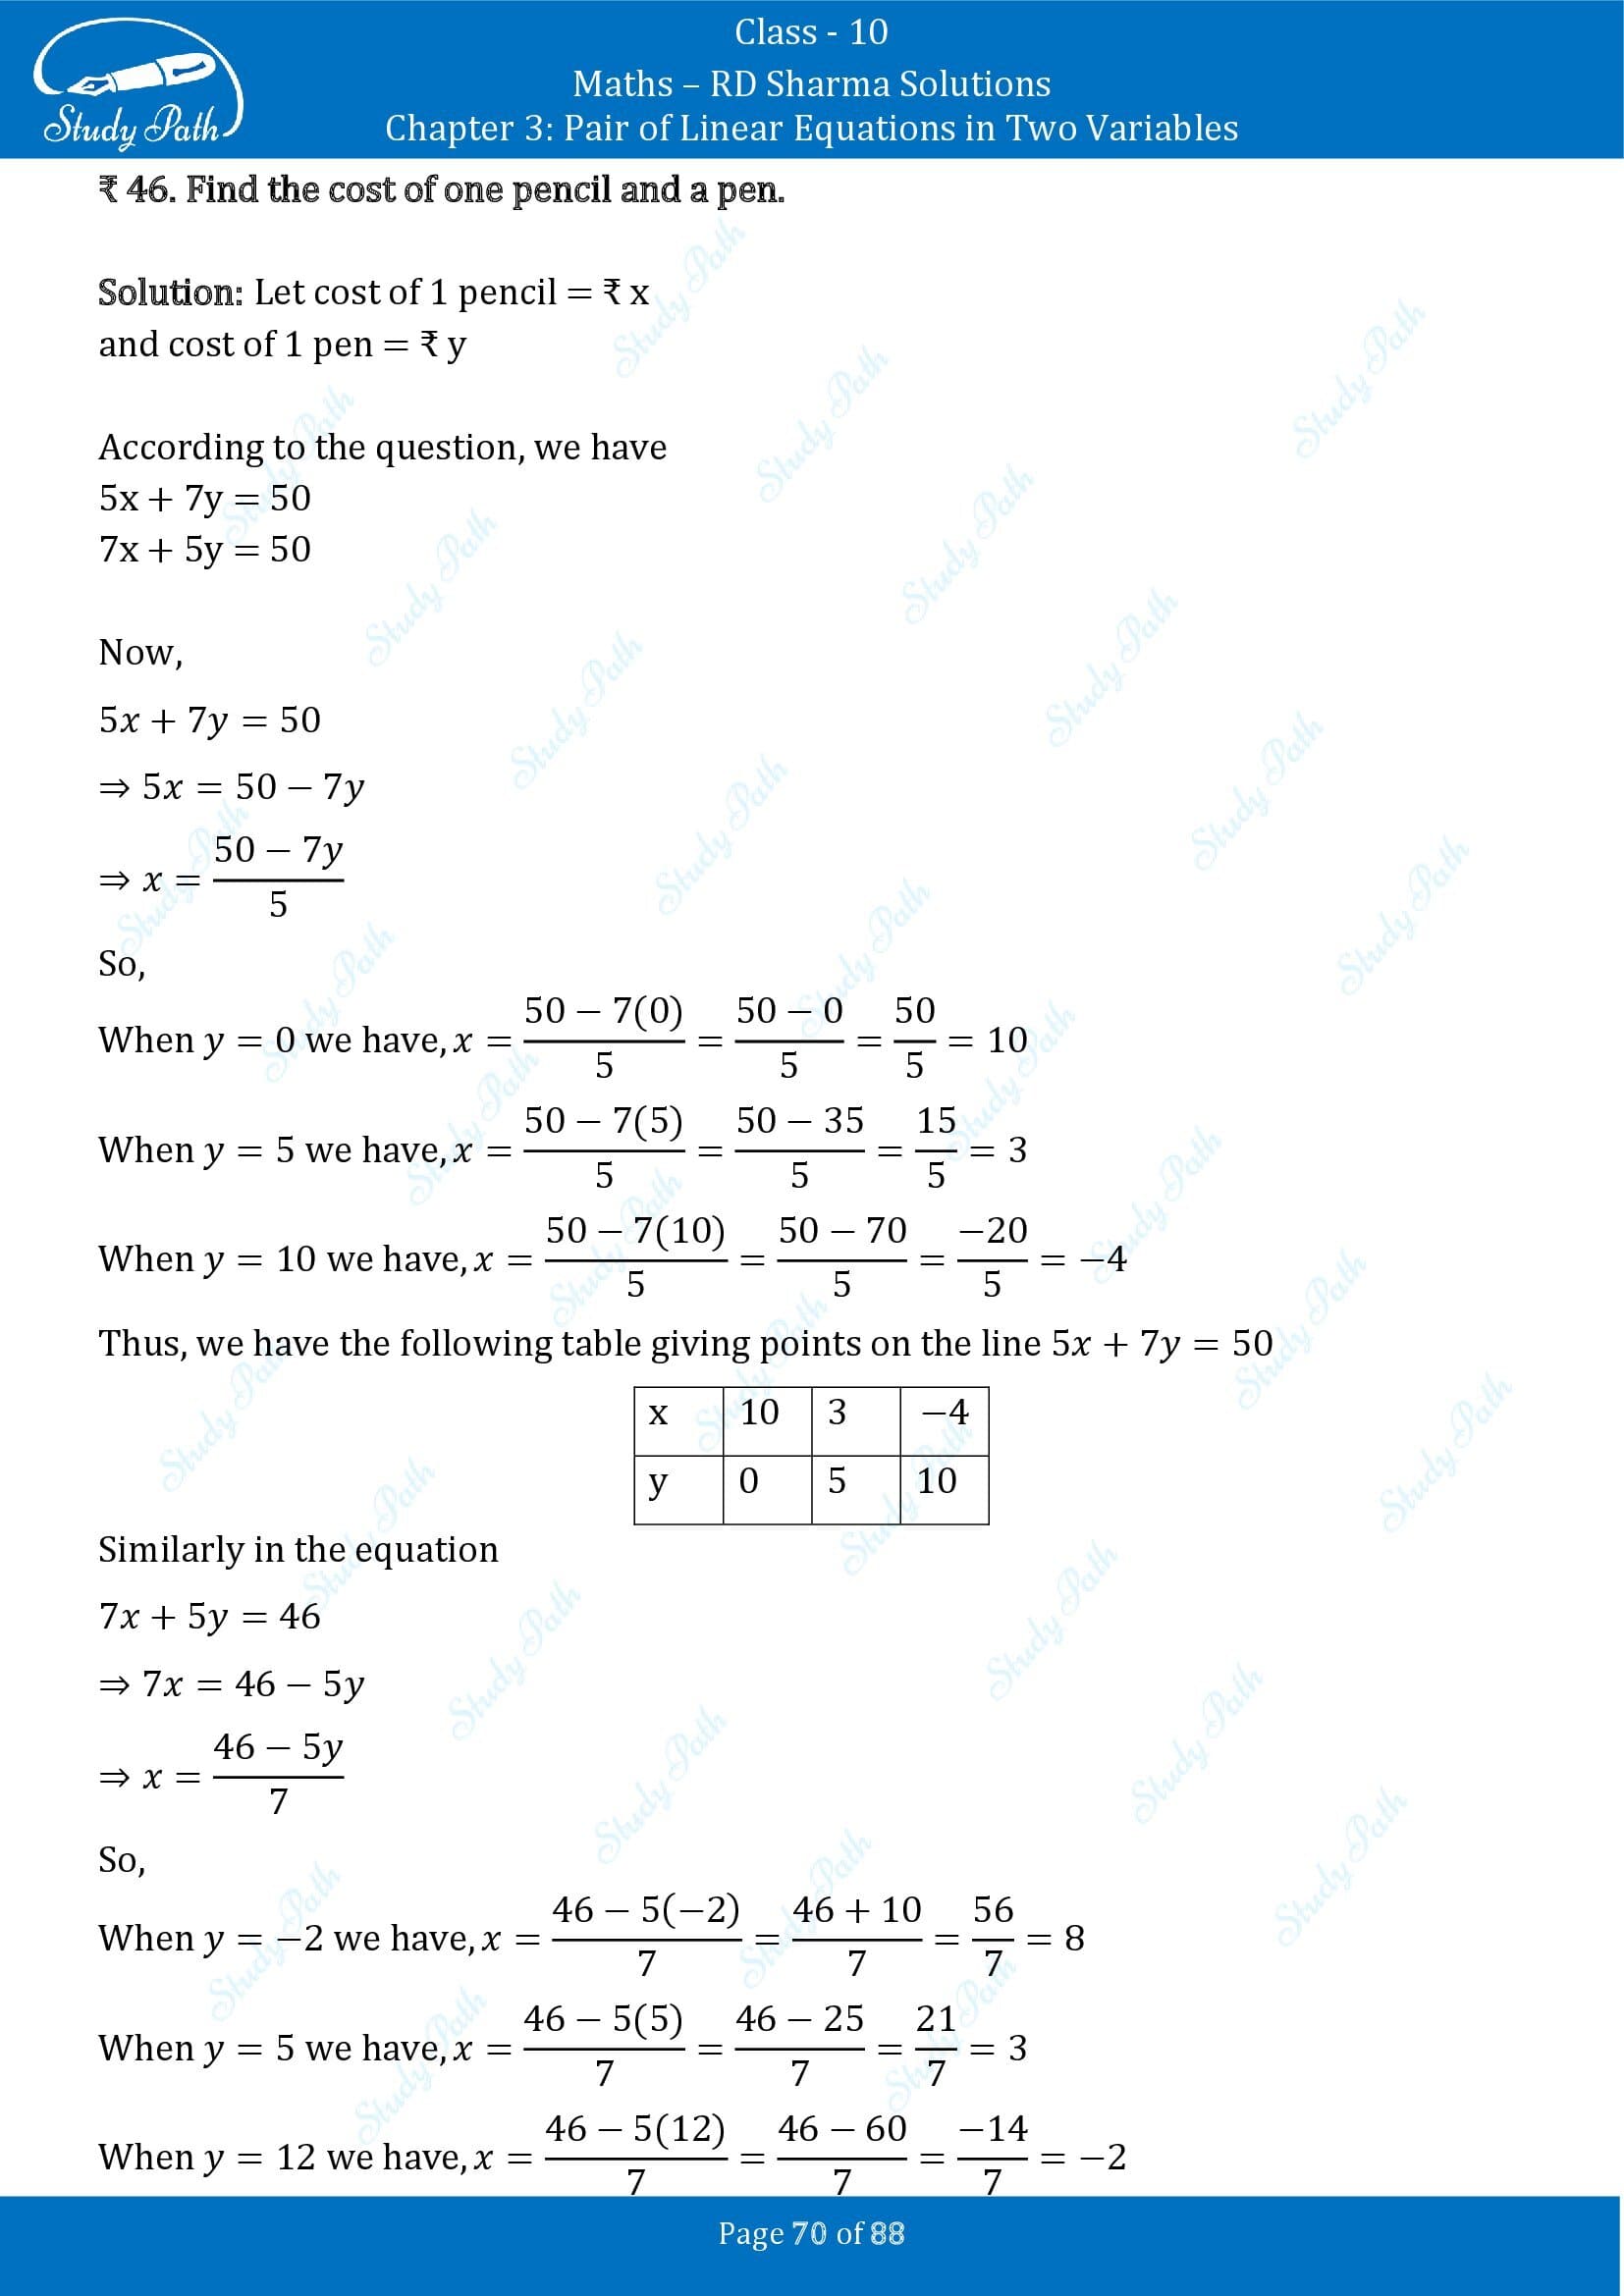 RD Sharma Solutions Class 10 Chapter 3 Pair of Linear Equations in Two Variables Exercise 3.2 00070